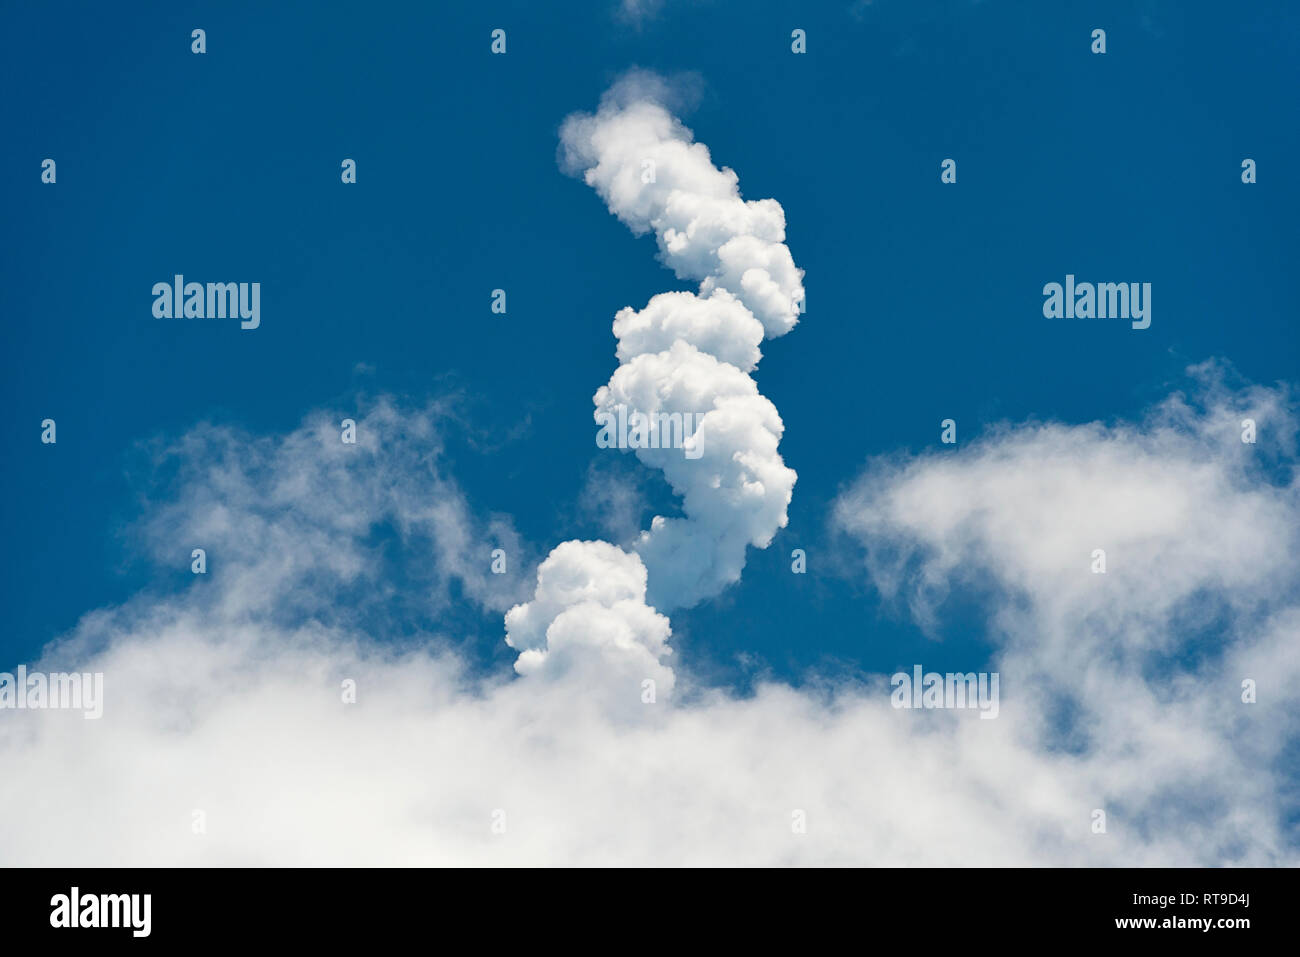 United States of America, Florida, Cape Canaveral, corcscrew cloud of exhaust in the sky after a SpaceX Falcon 9 rocket launch Stock Photo